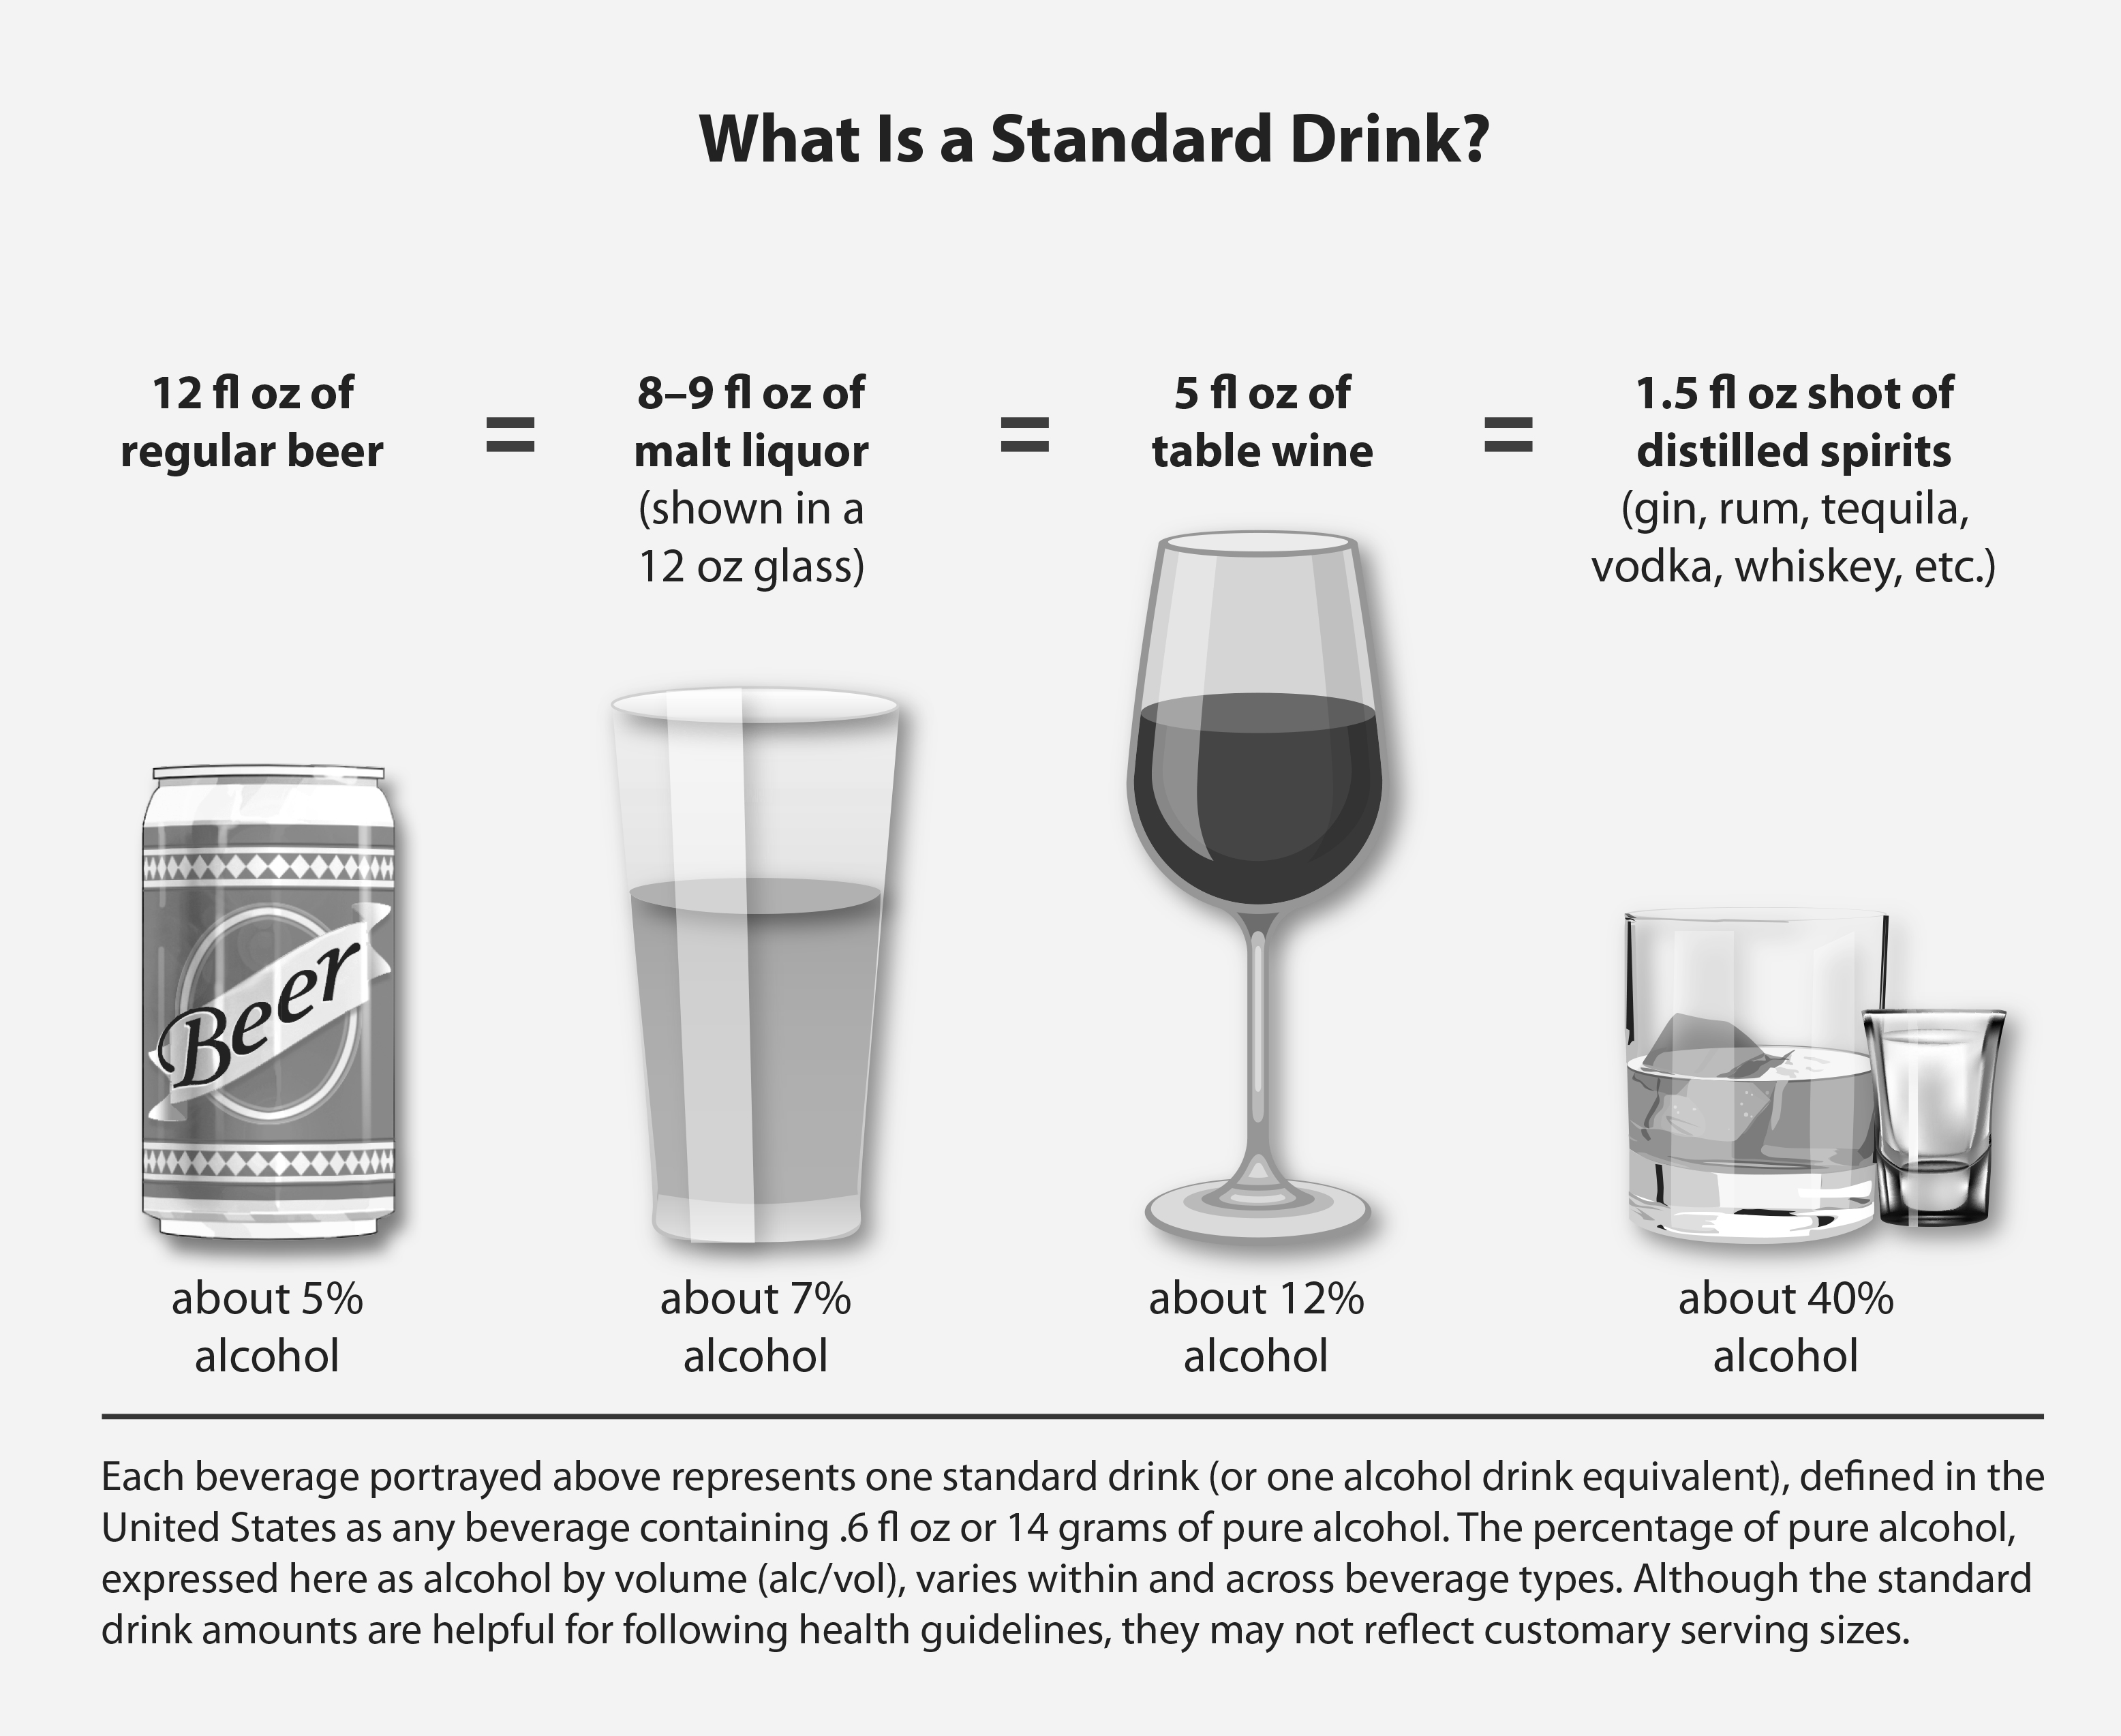 ounces glass percentage alcoholic foundations wellness grams niaaa grayscale equals consumption defined represents alcoholism addiction dependency nih age sipping flour